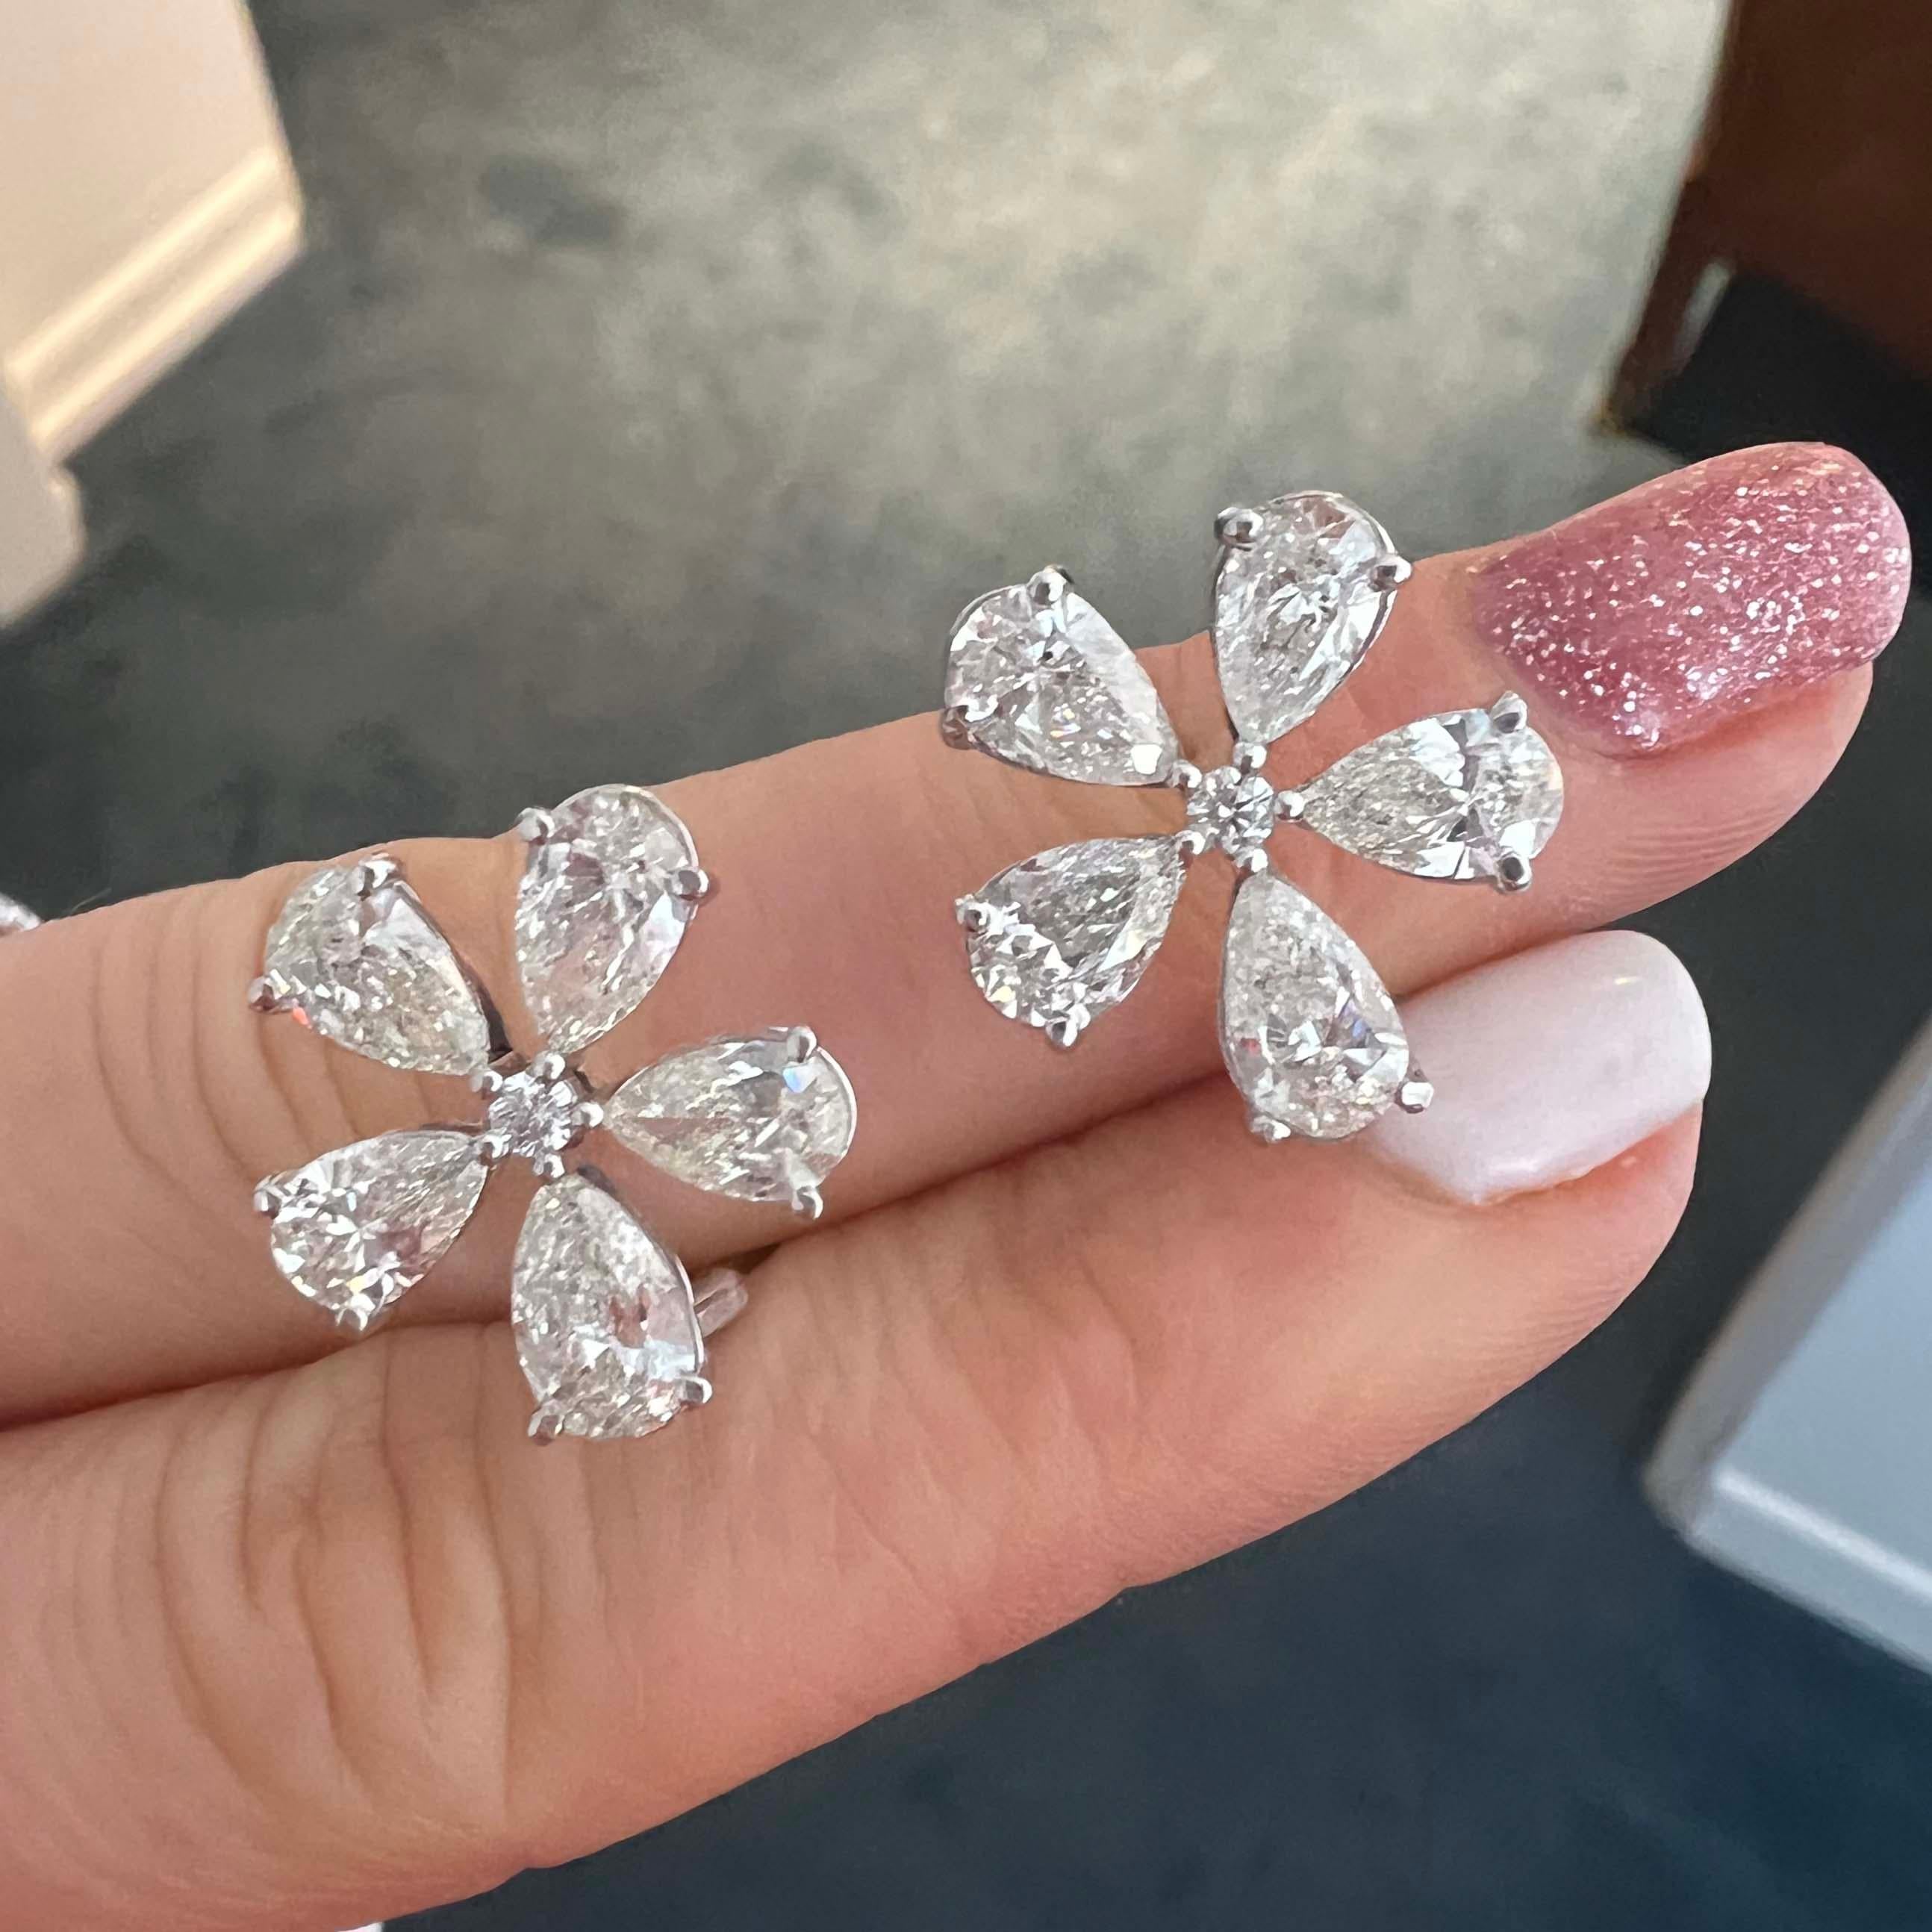 Spectacular 6.00-carat cluster floral earrings. The earrings are 6.00 carat in total weight. Based on the grading of our GIA-certified gemologists, the stones are estimated to be G/H VS/ SI. Each stone averages 0.60 carats. The earrings are crafted